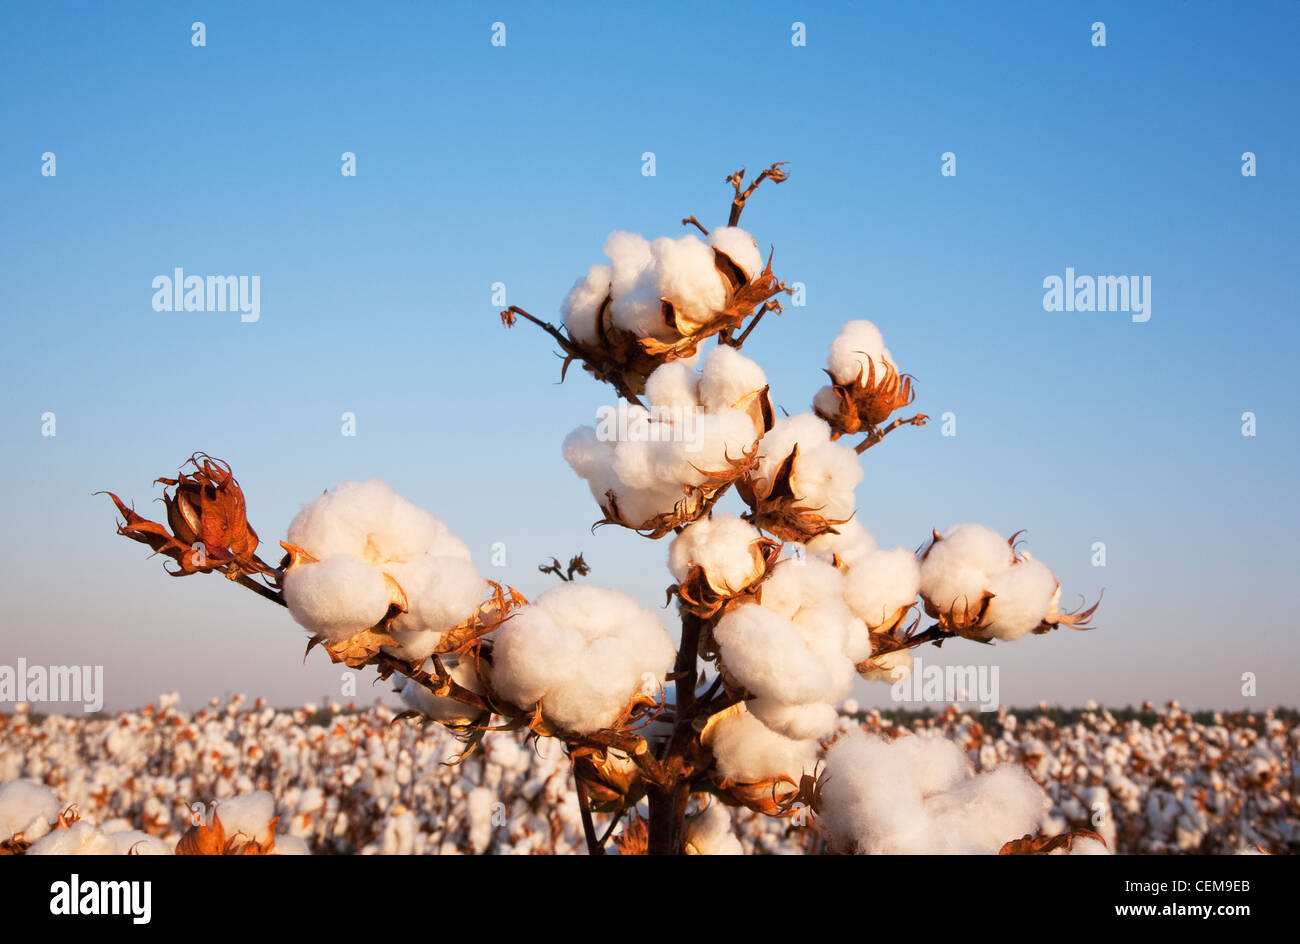 Agriculture - Cluster of open mature high-yield cotton bolls at harvest stage at the top of the plant / near England, Arkansas. Stock Photo